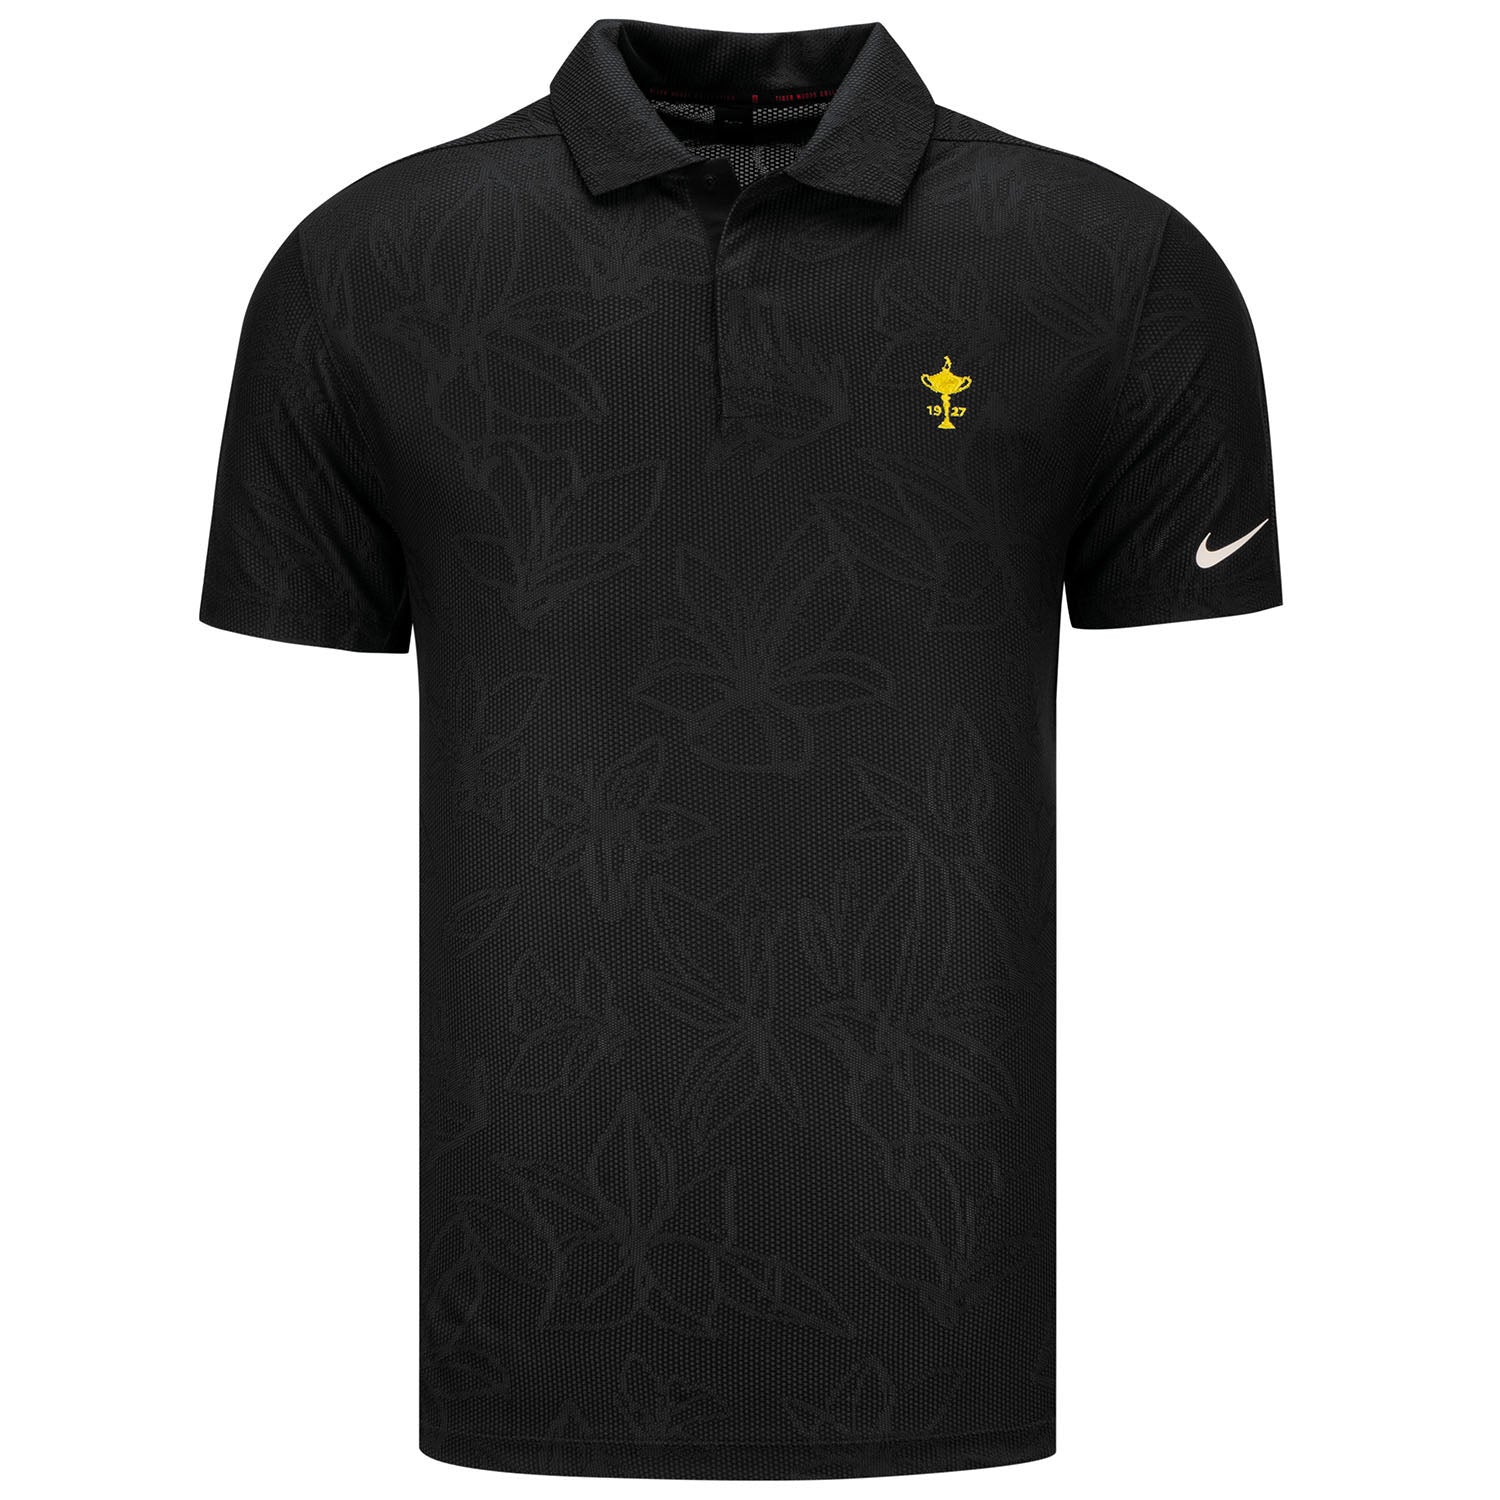 Ryder Cup Nike Tiger Woods Floral Jacquard Polo in Black- Front View